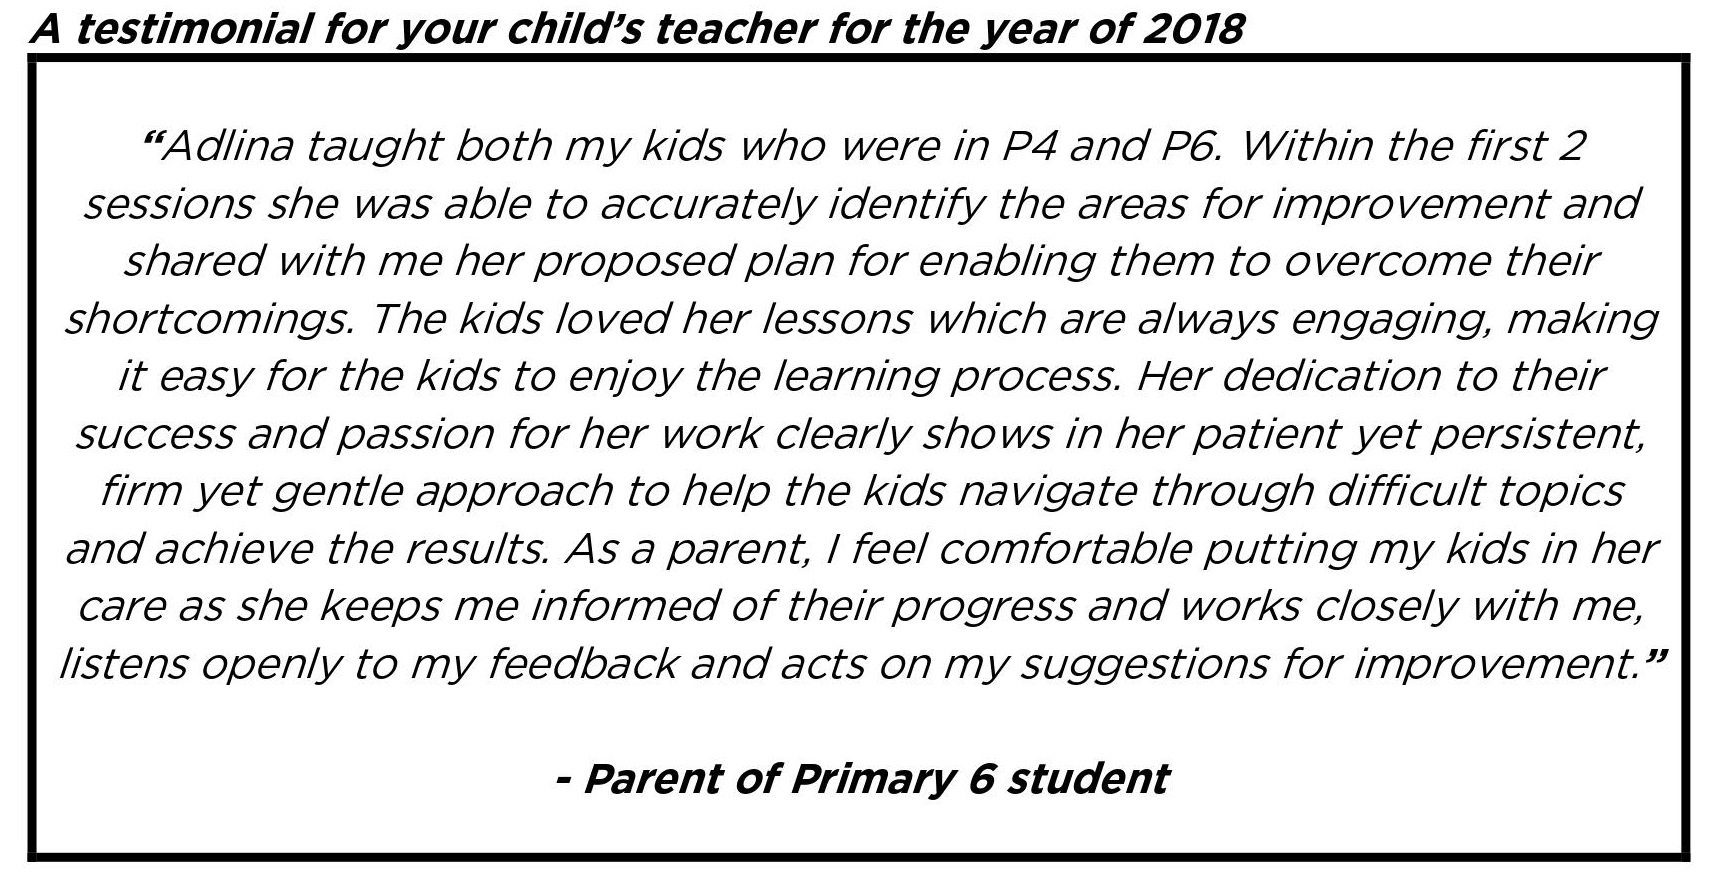 “The kids loved her lessons which are always engaging...”